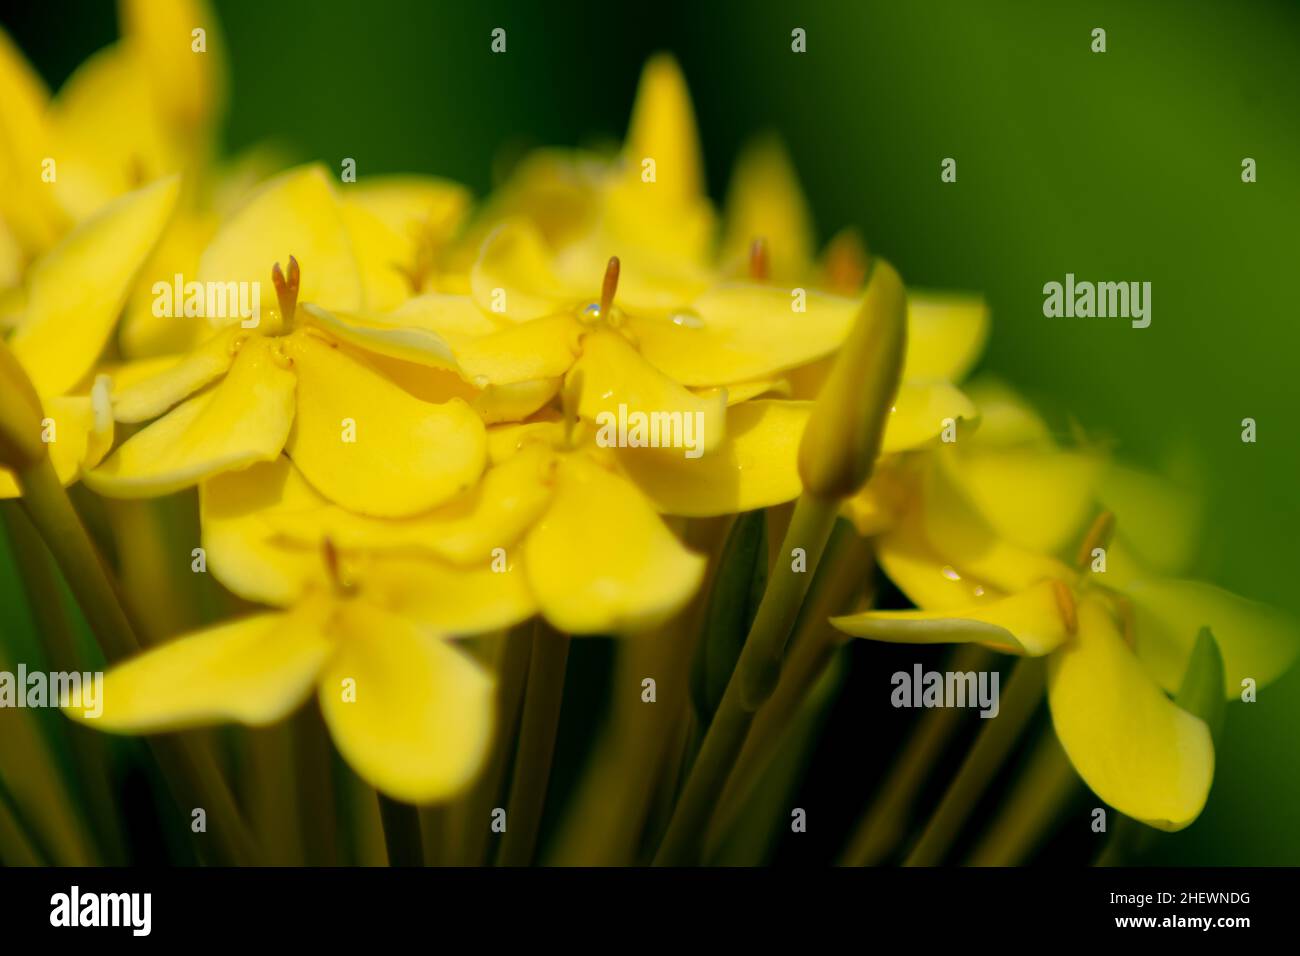 a bunch of close-up beautiful yellow ixora flowers with blurry and soft focused nature background Stock Photo